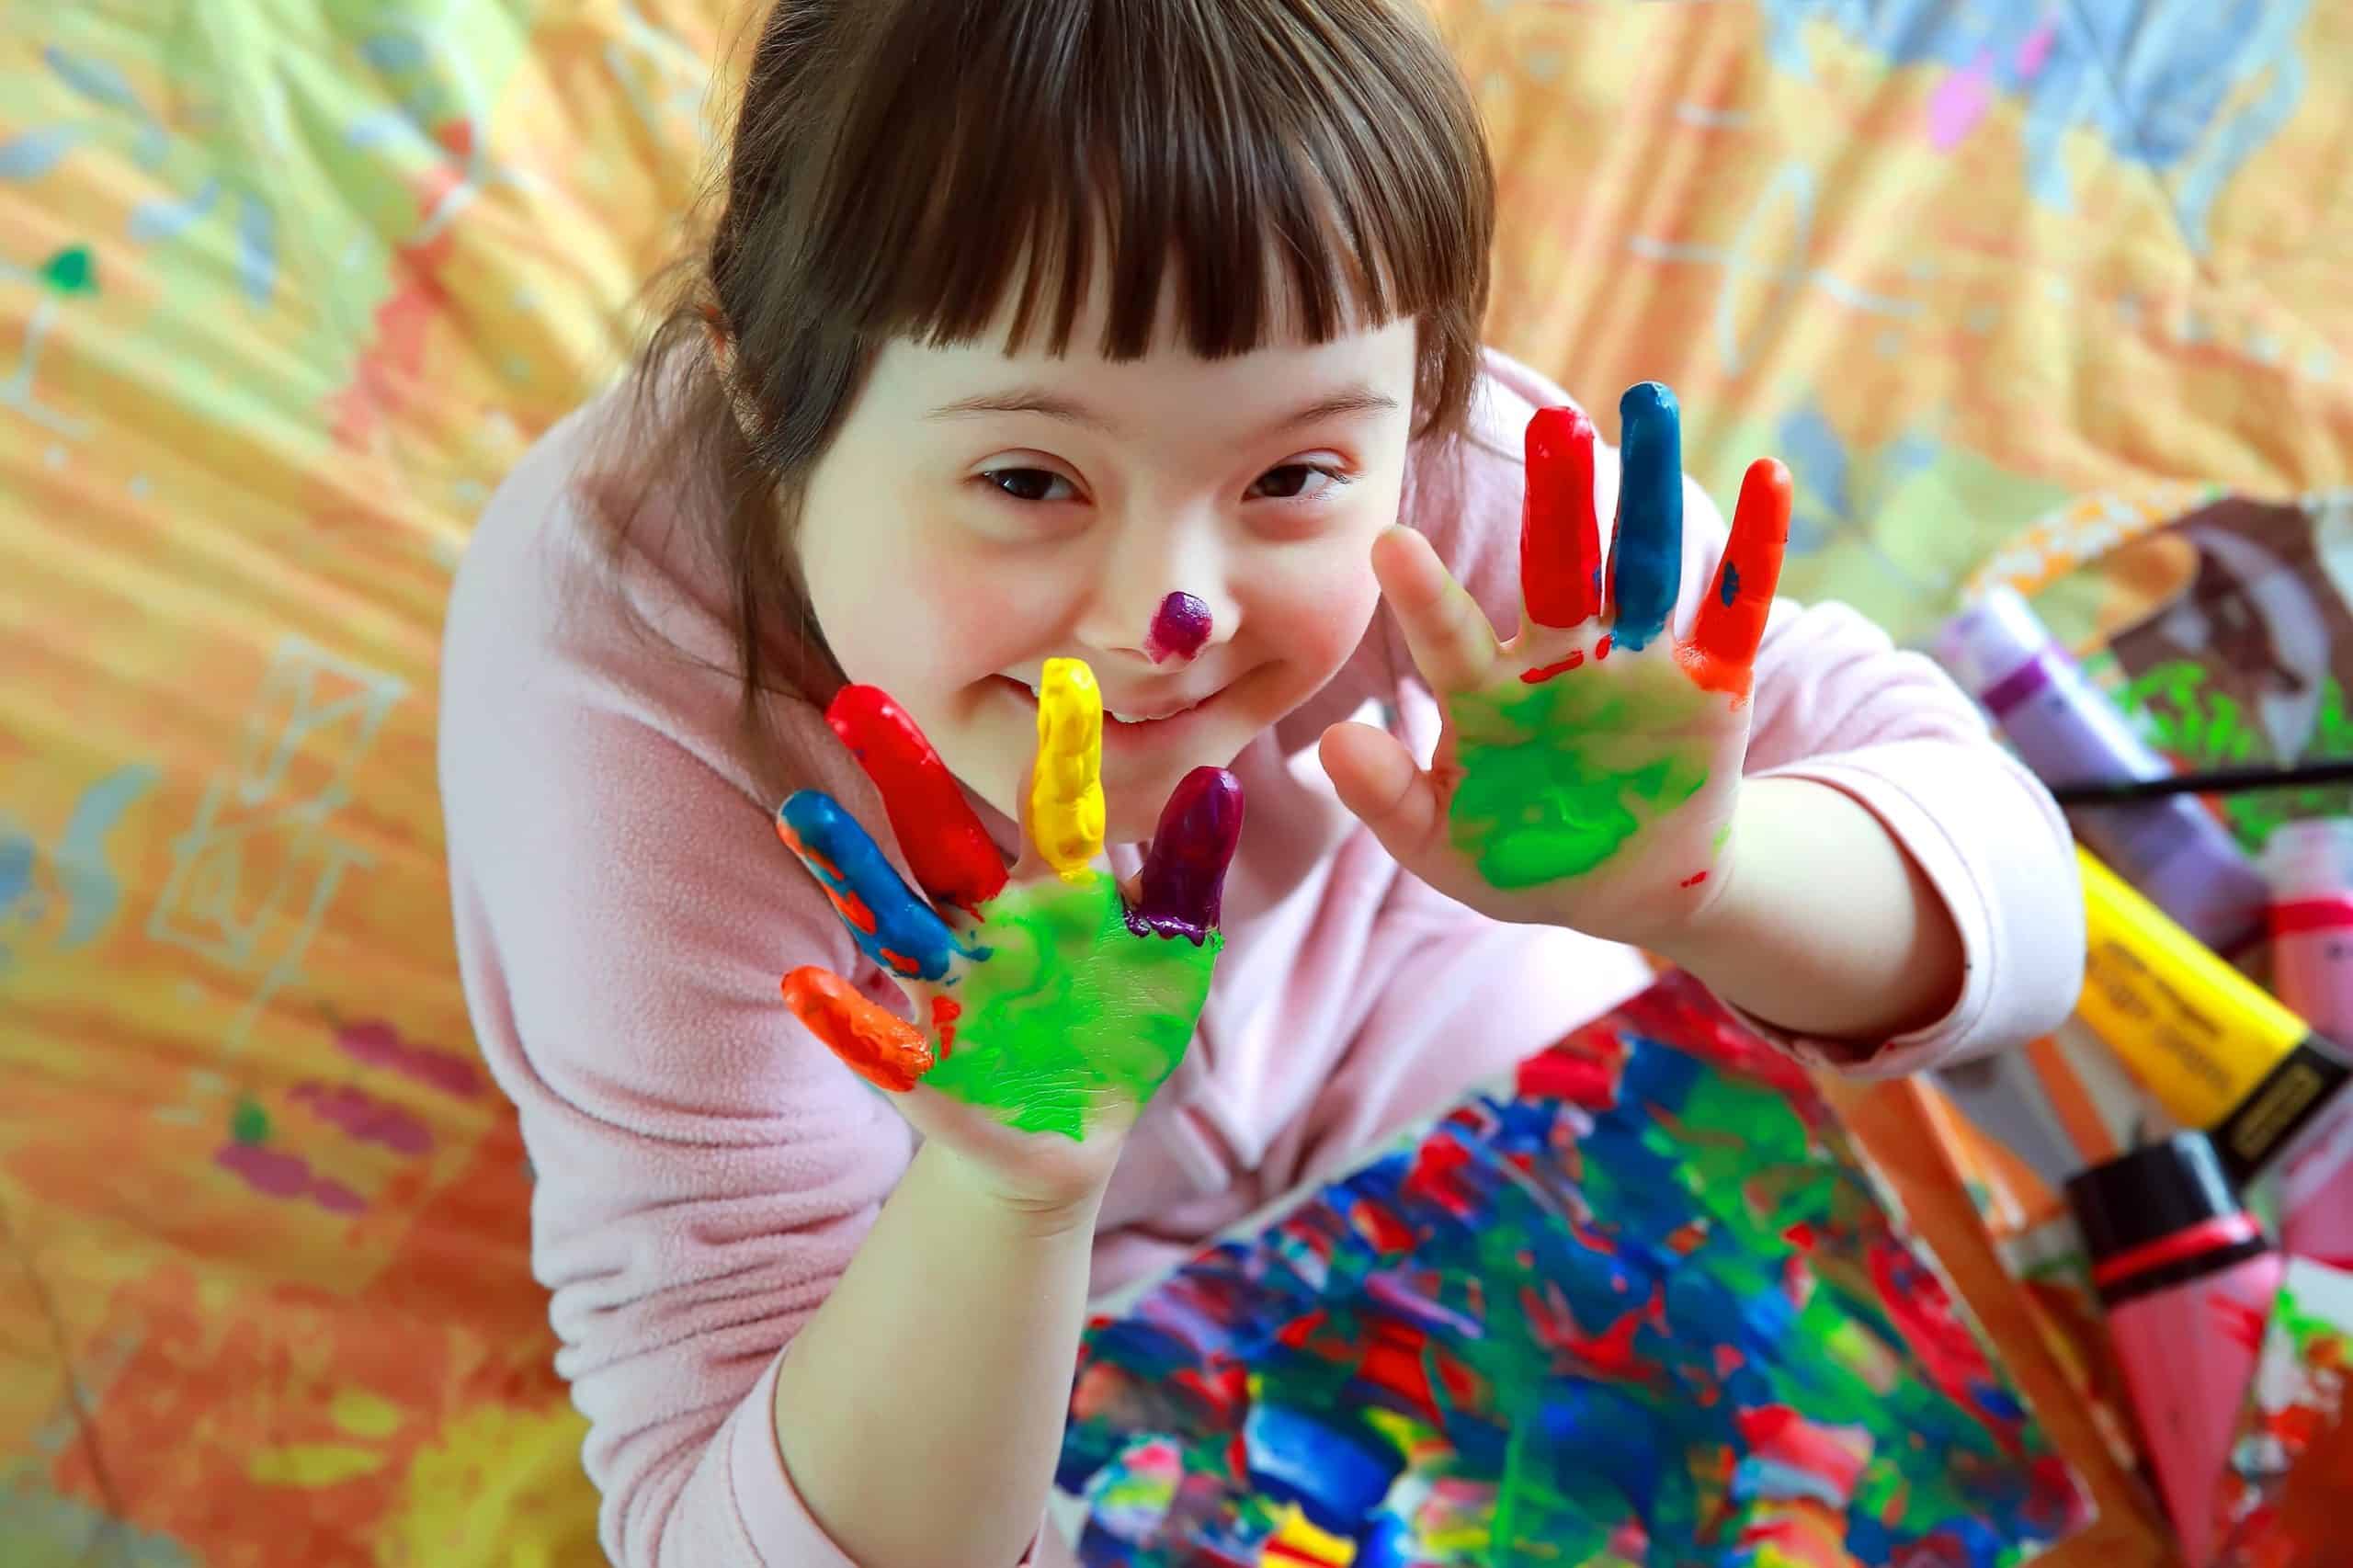 coloured-hands-girl-with-disability